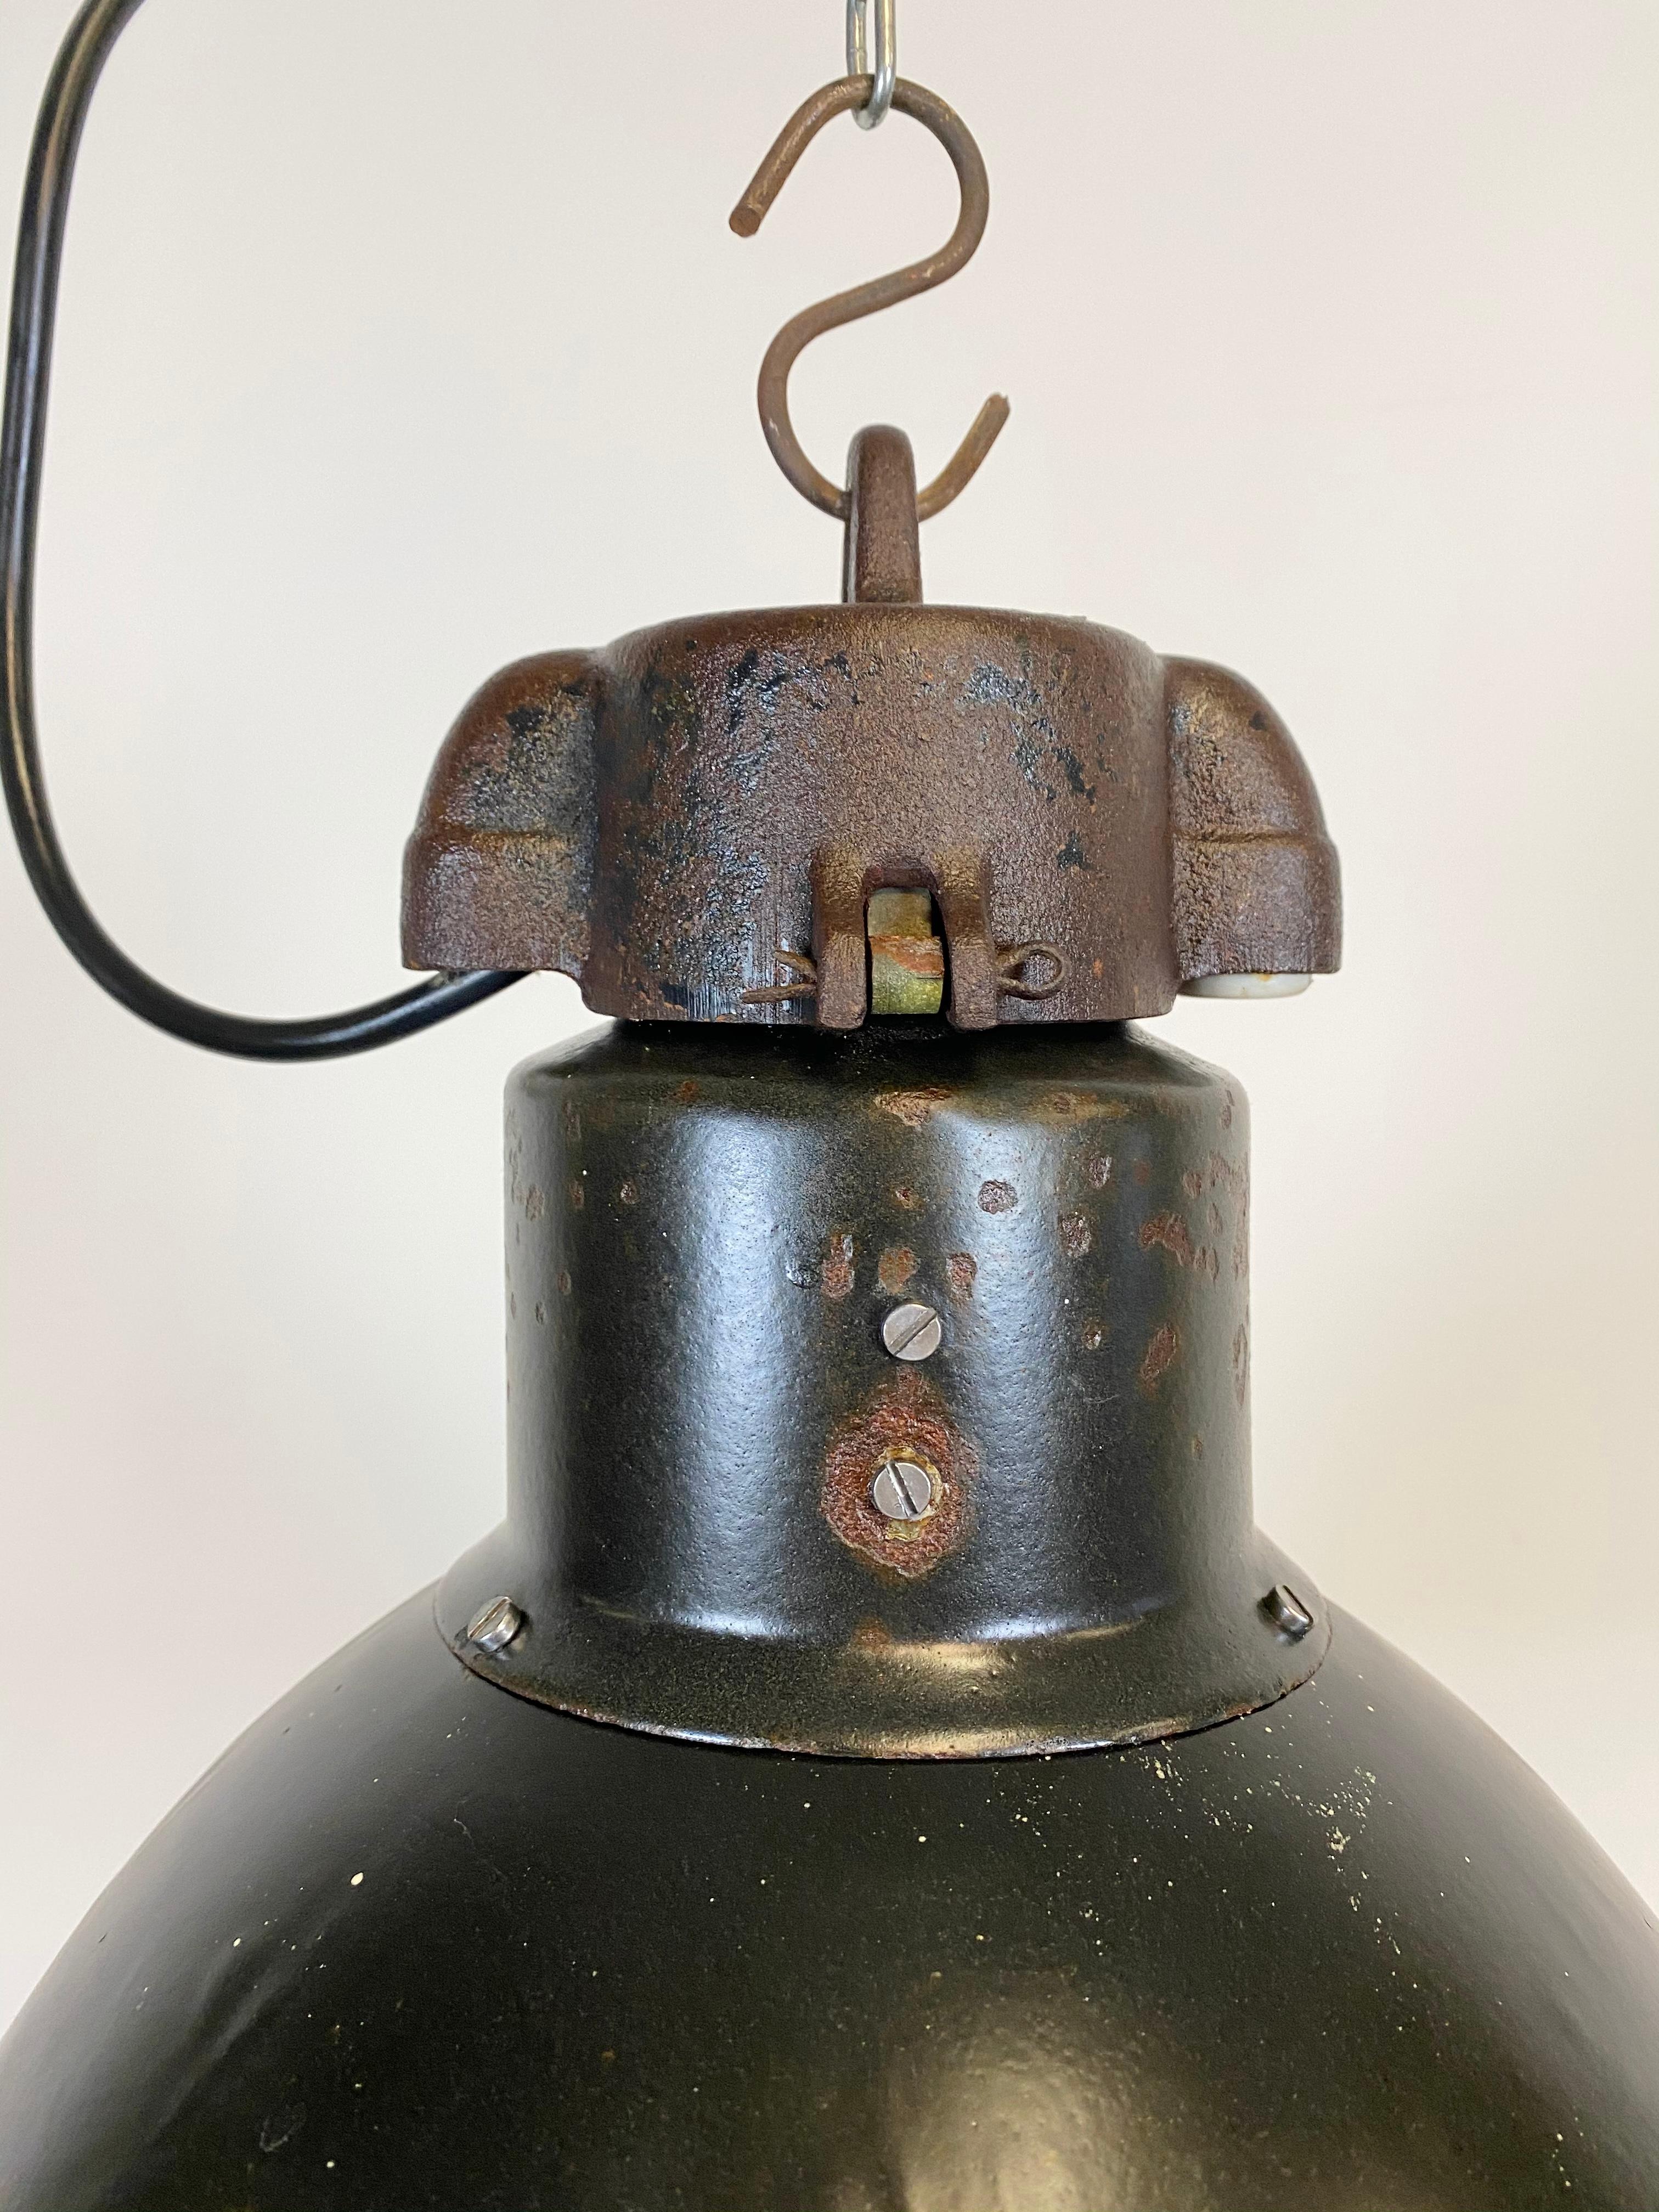 - Vintage Industrial black enamel pendant lamp
- Designed in the period of Bauhaus, 1930s 
- White enamel inside the shade 
- Cast iron top 
- New porcelain socket for E 27 lightbulbs and wire
- Diameter 34 cm, weight 3 kg.